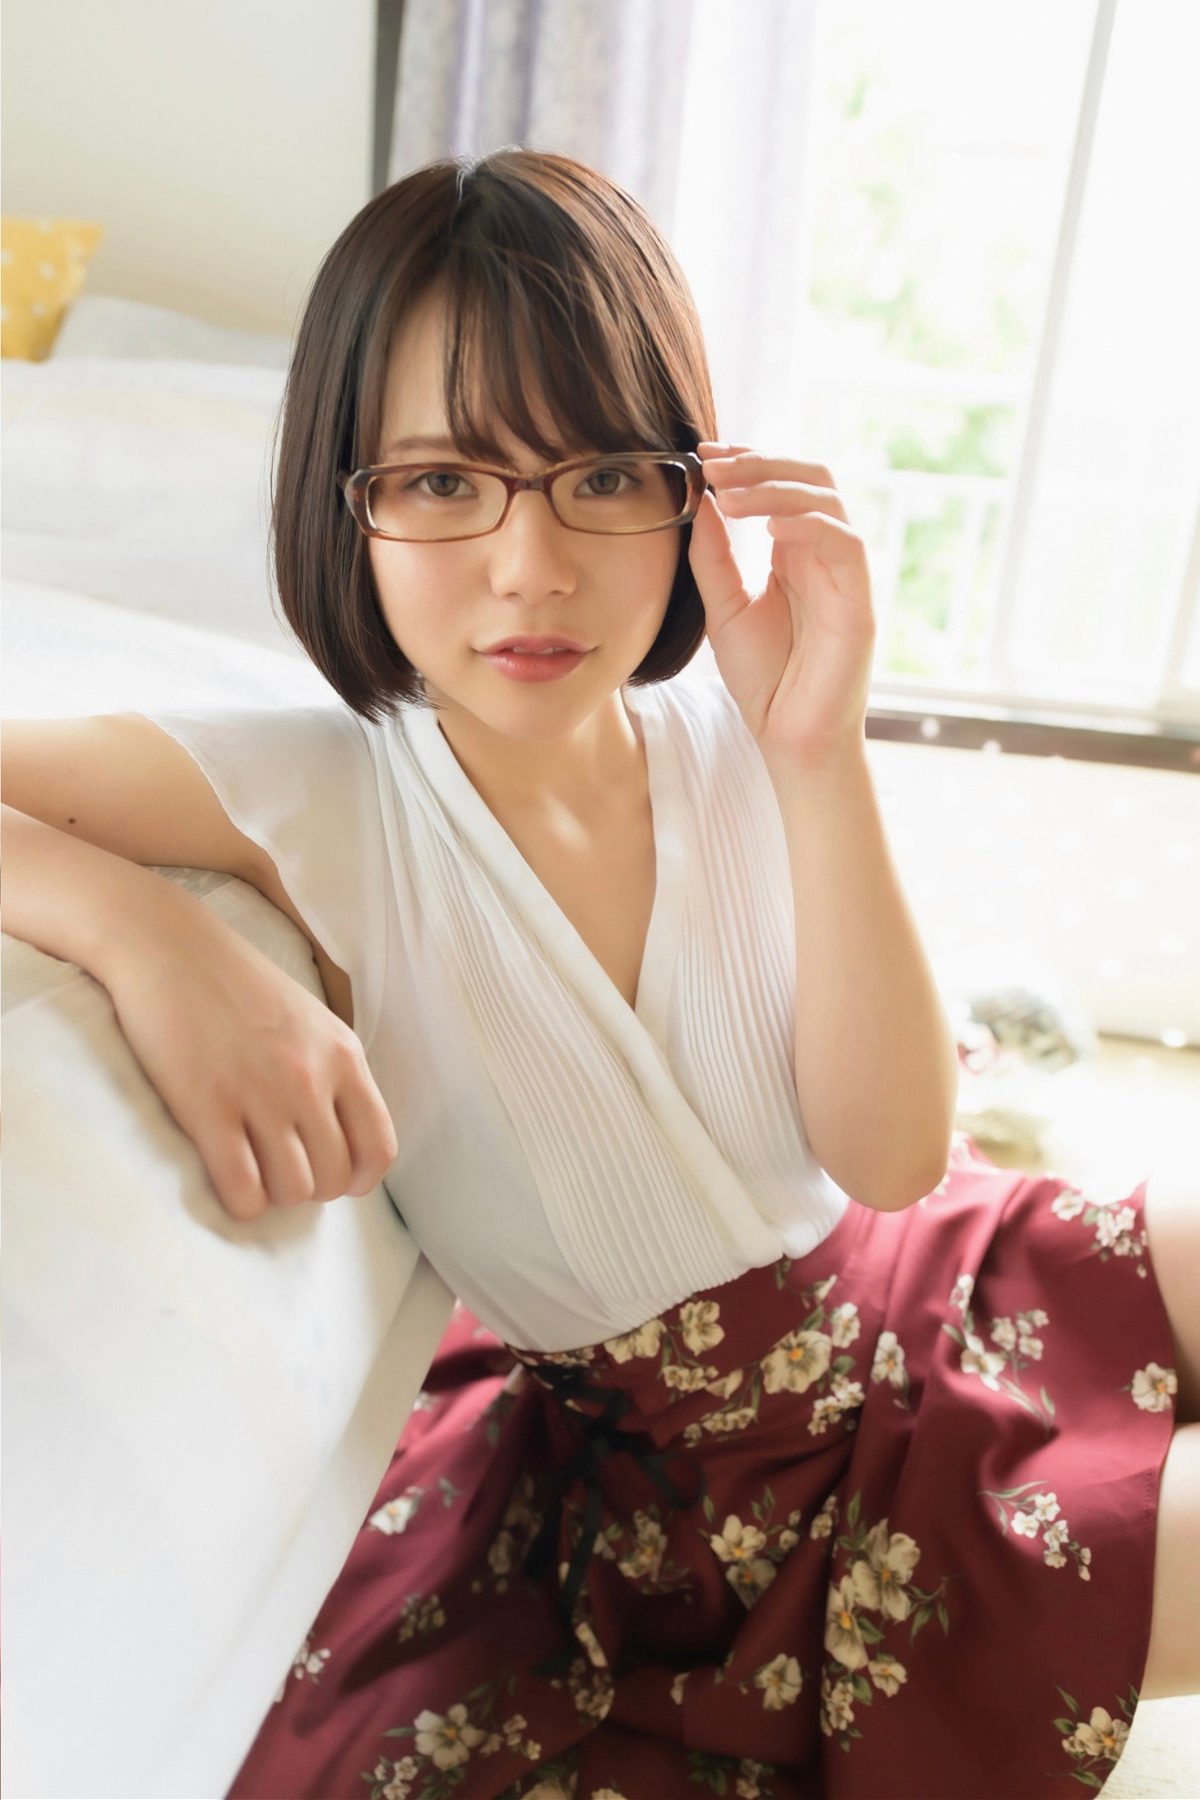 Gravure Photo Book Nenne 初愛ねんね Eye Difference 0030 1123891319.jpg